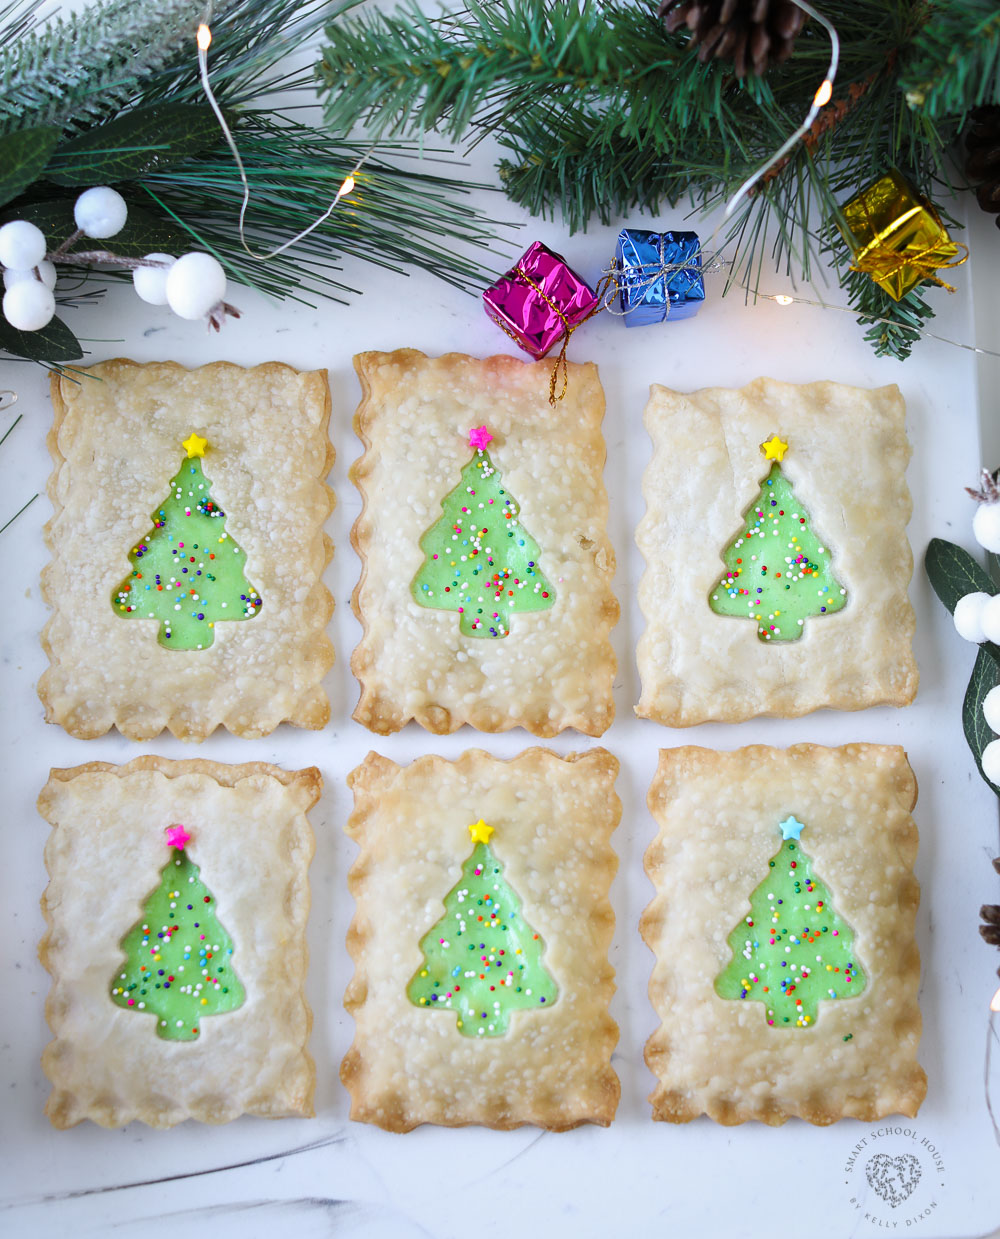 My Christmas Tree Hand Pies are as adorable as it gets! These little handheld pies are filled with delicious cheesecake and surrounded with pie crust and adorned with sprinkles that look like Christmas lights. This holiday dessert idea is sure to get everyone's attention!